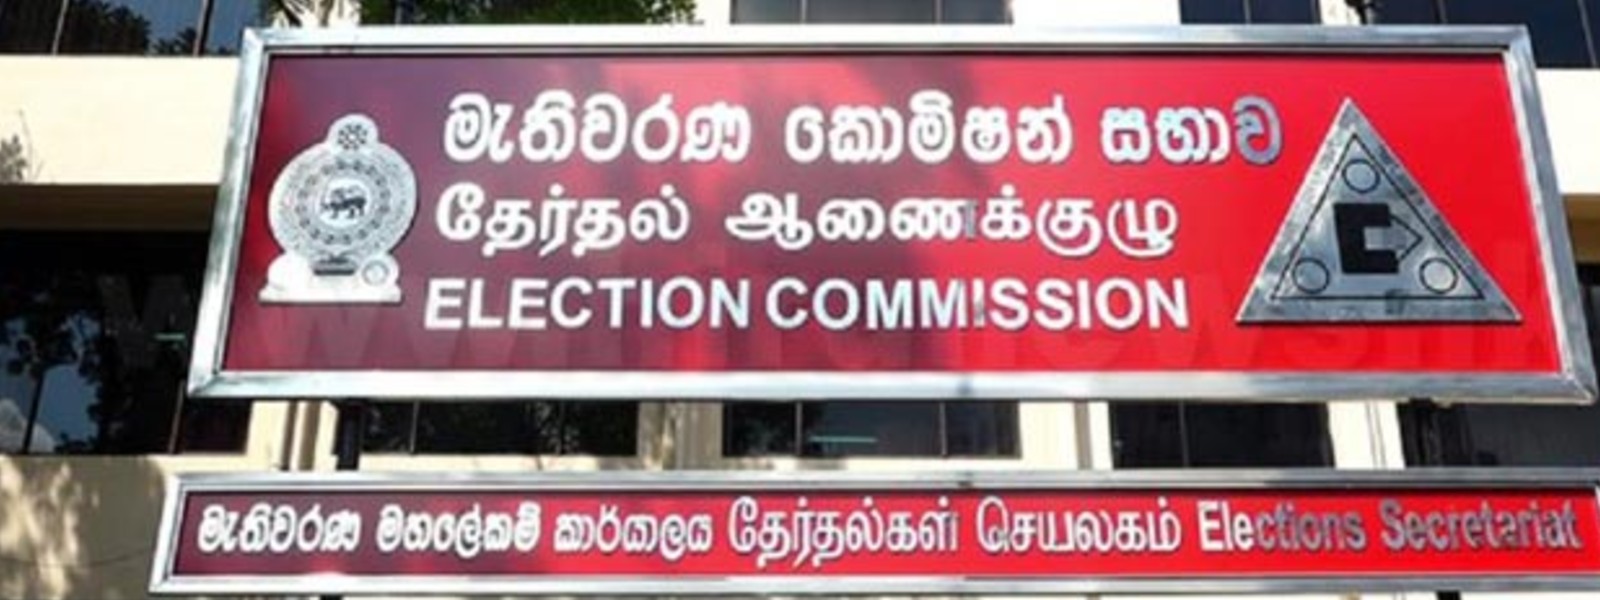 National Election Commission to convene today